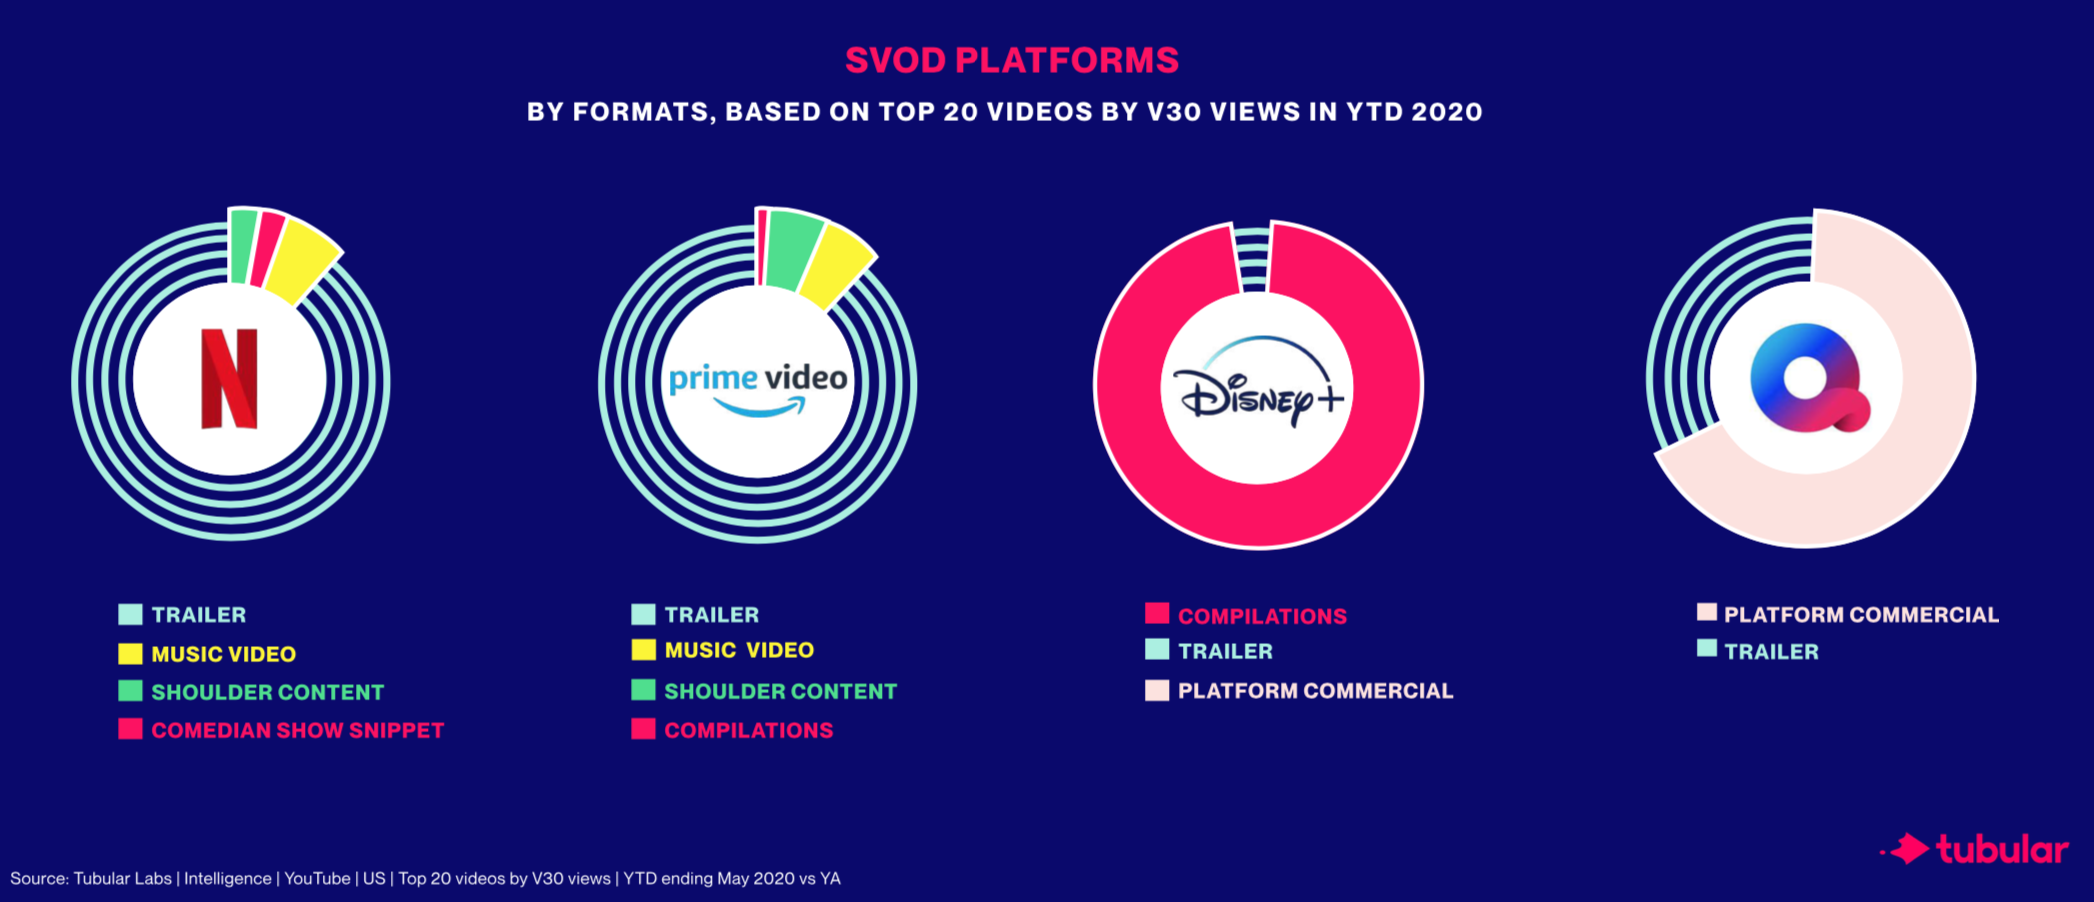 How SVODs Are Leveraging Facebook And YouTube To Grow Their Audiences